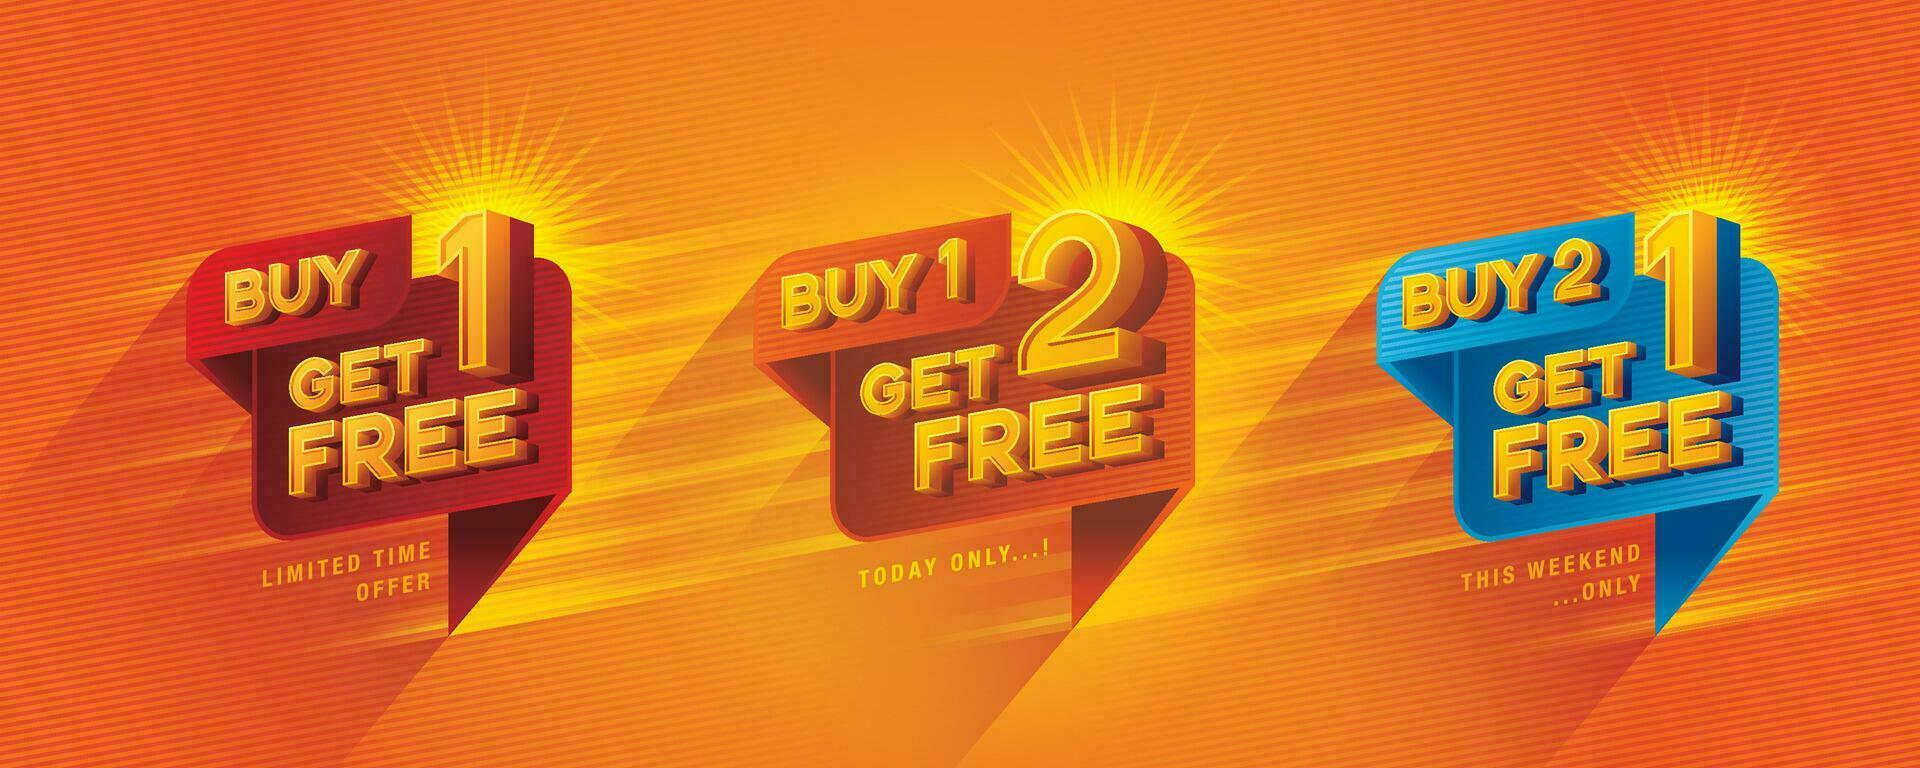 Buy 1 get 1 free, Buy 1 get 2 free, Buy 2 get 1 free tag and discount label sign vector